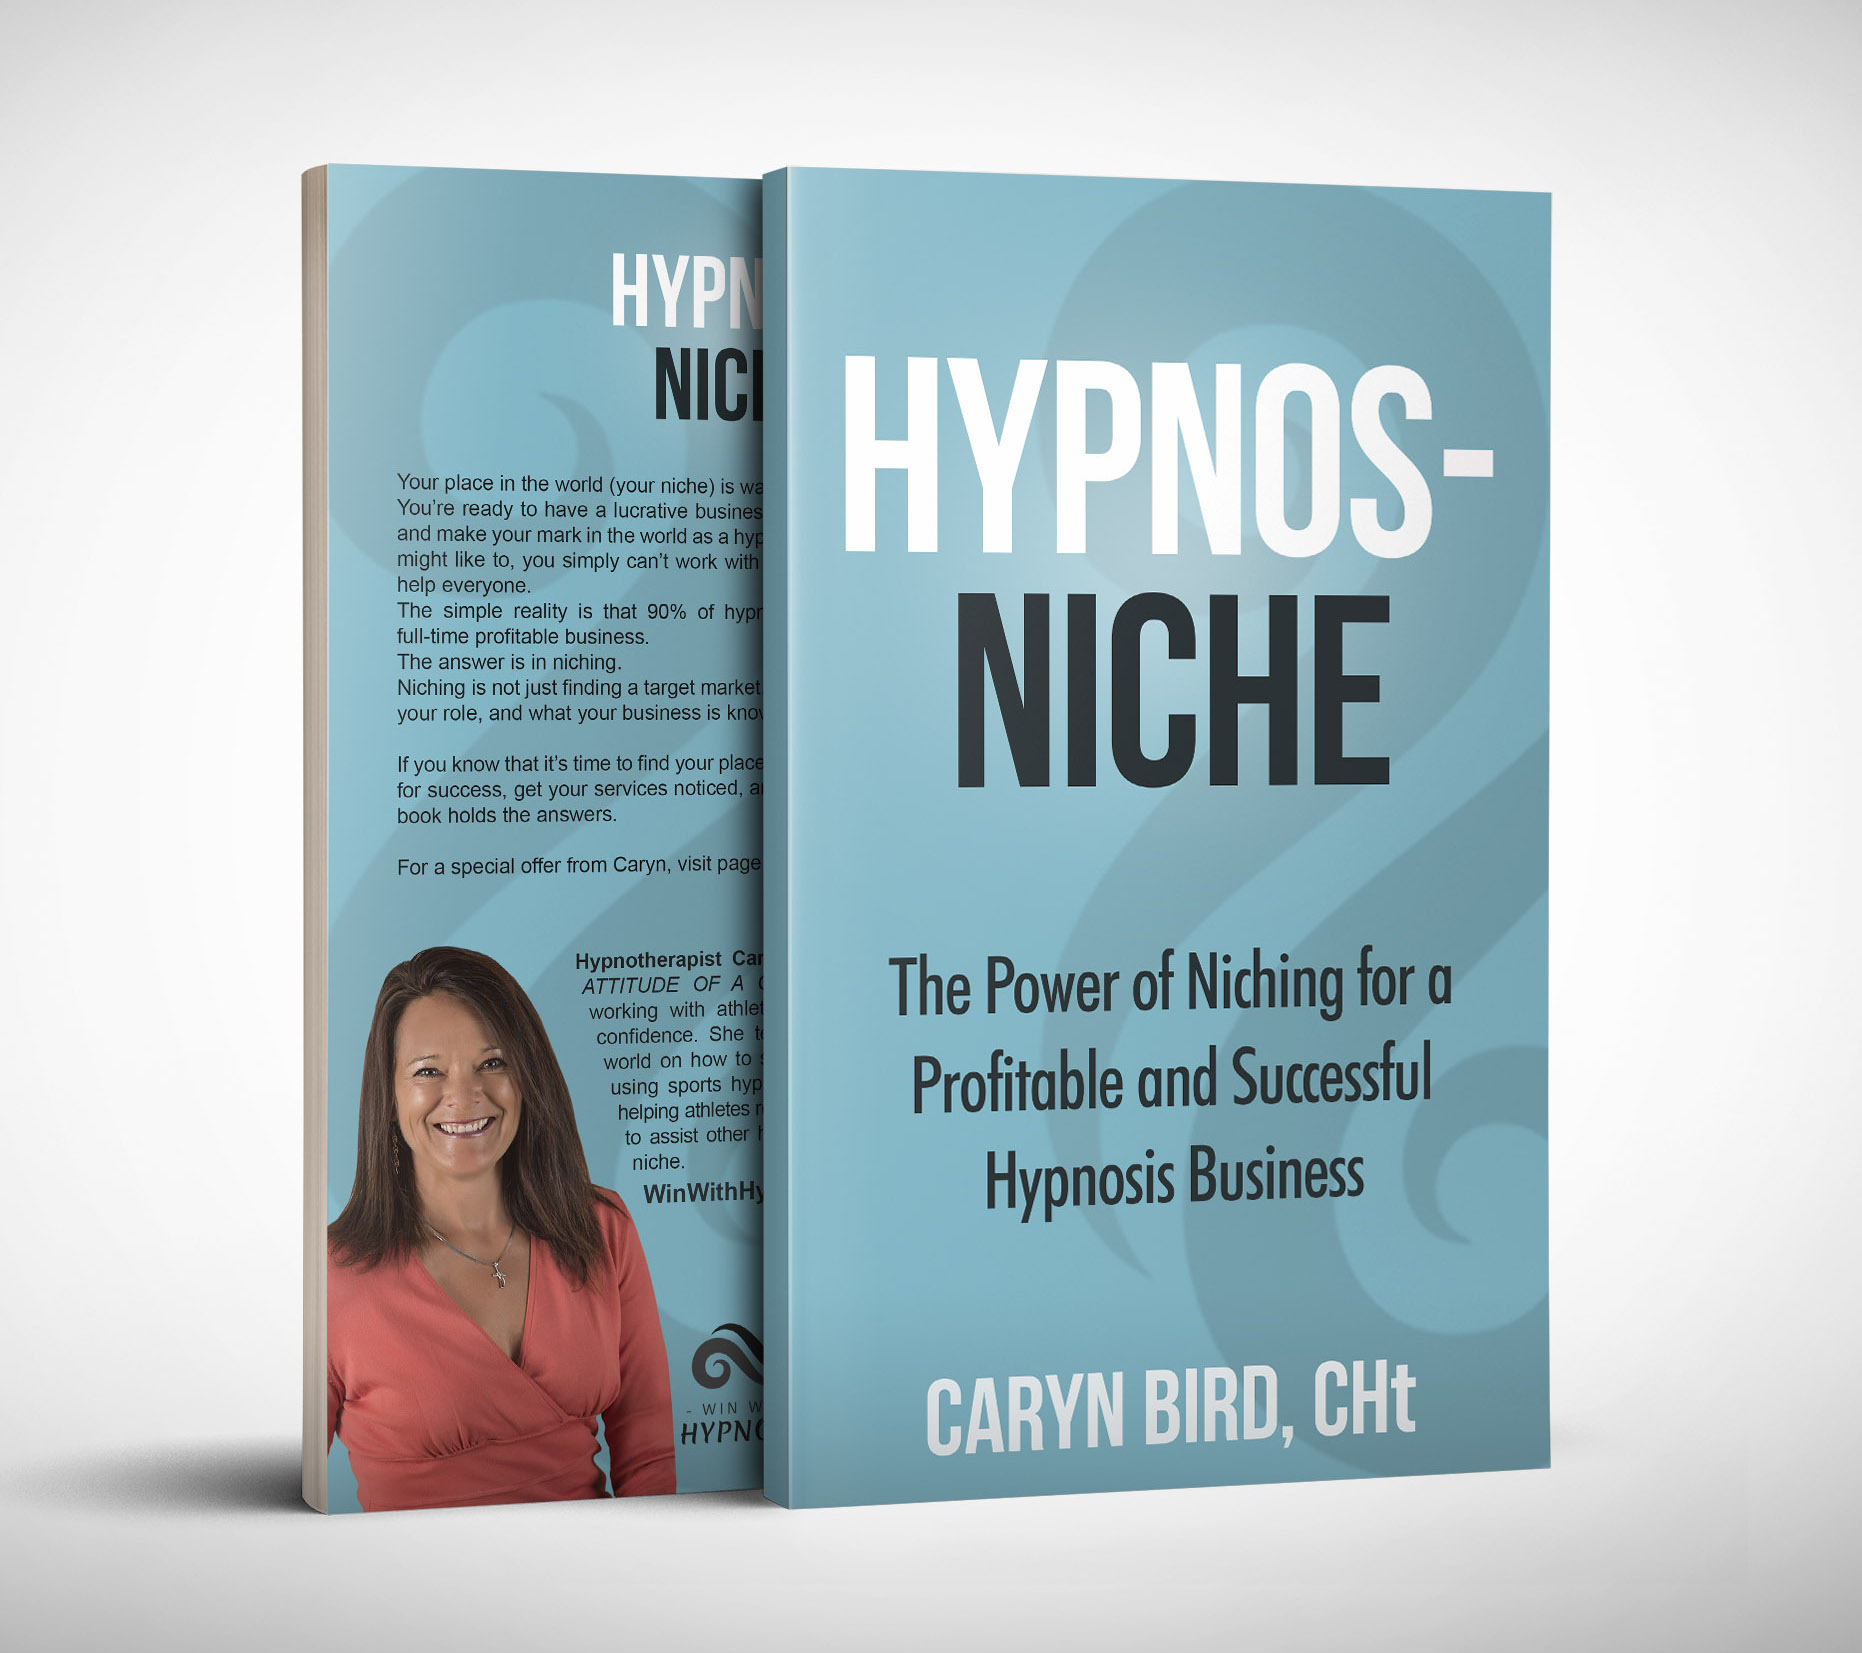 Cover of Hypnos Niche: The Power of Niching for a Profitable and Successful Hypnosis Business by Caryn Bird, CHt.